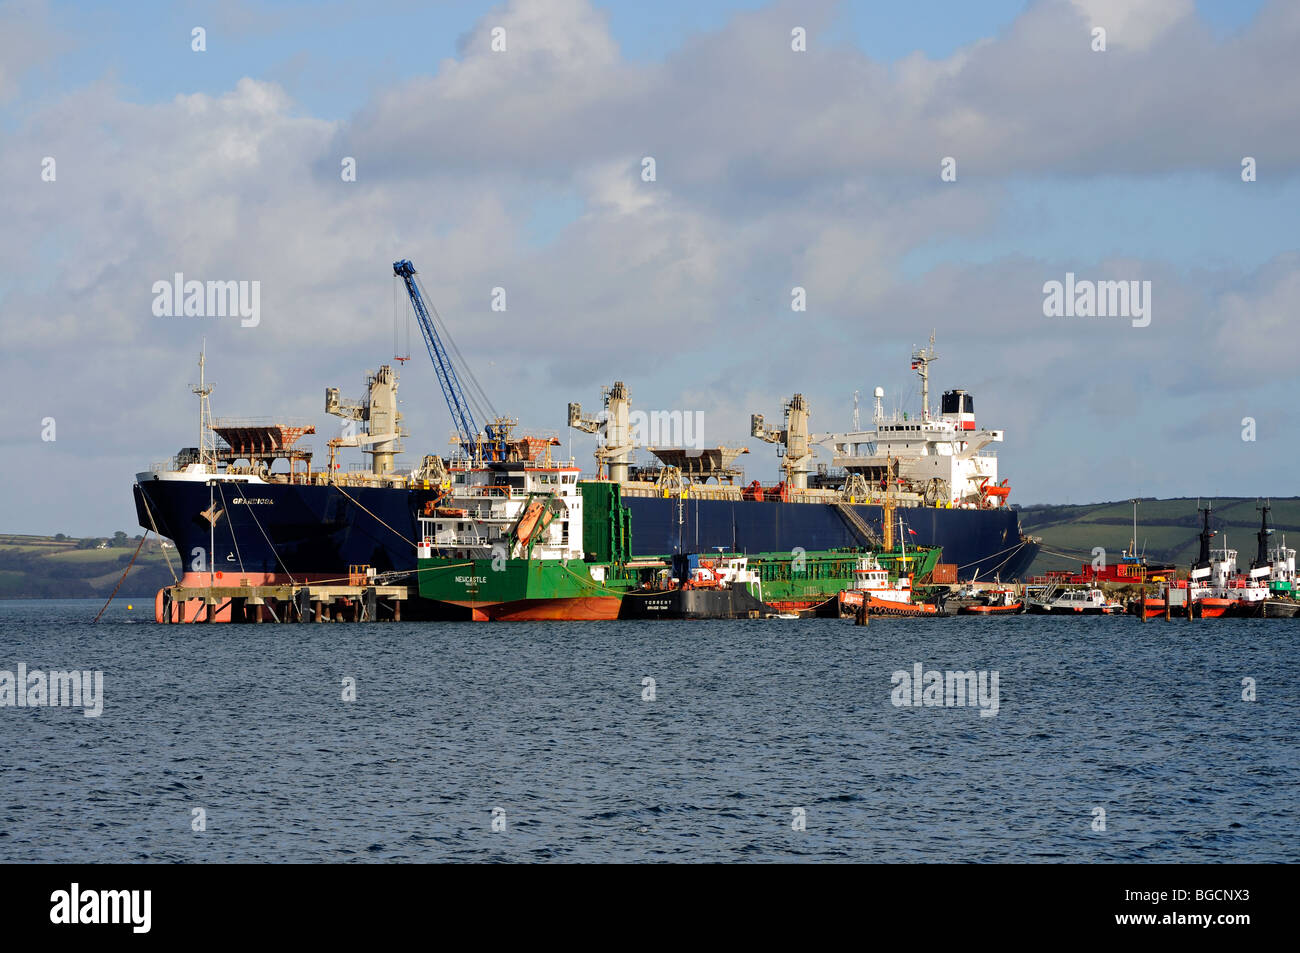 a cargo ship in dock at falmouth harbour in cornwall, england, uk Stock Photo